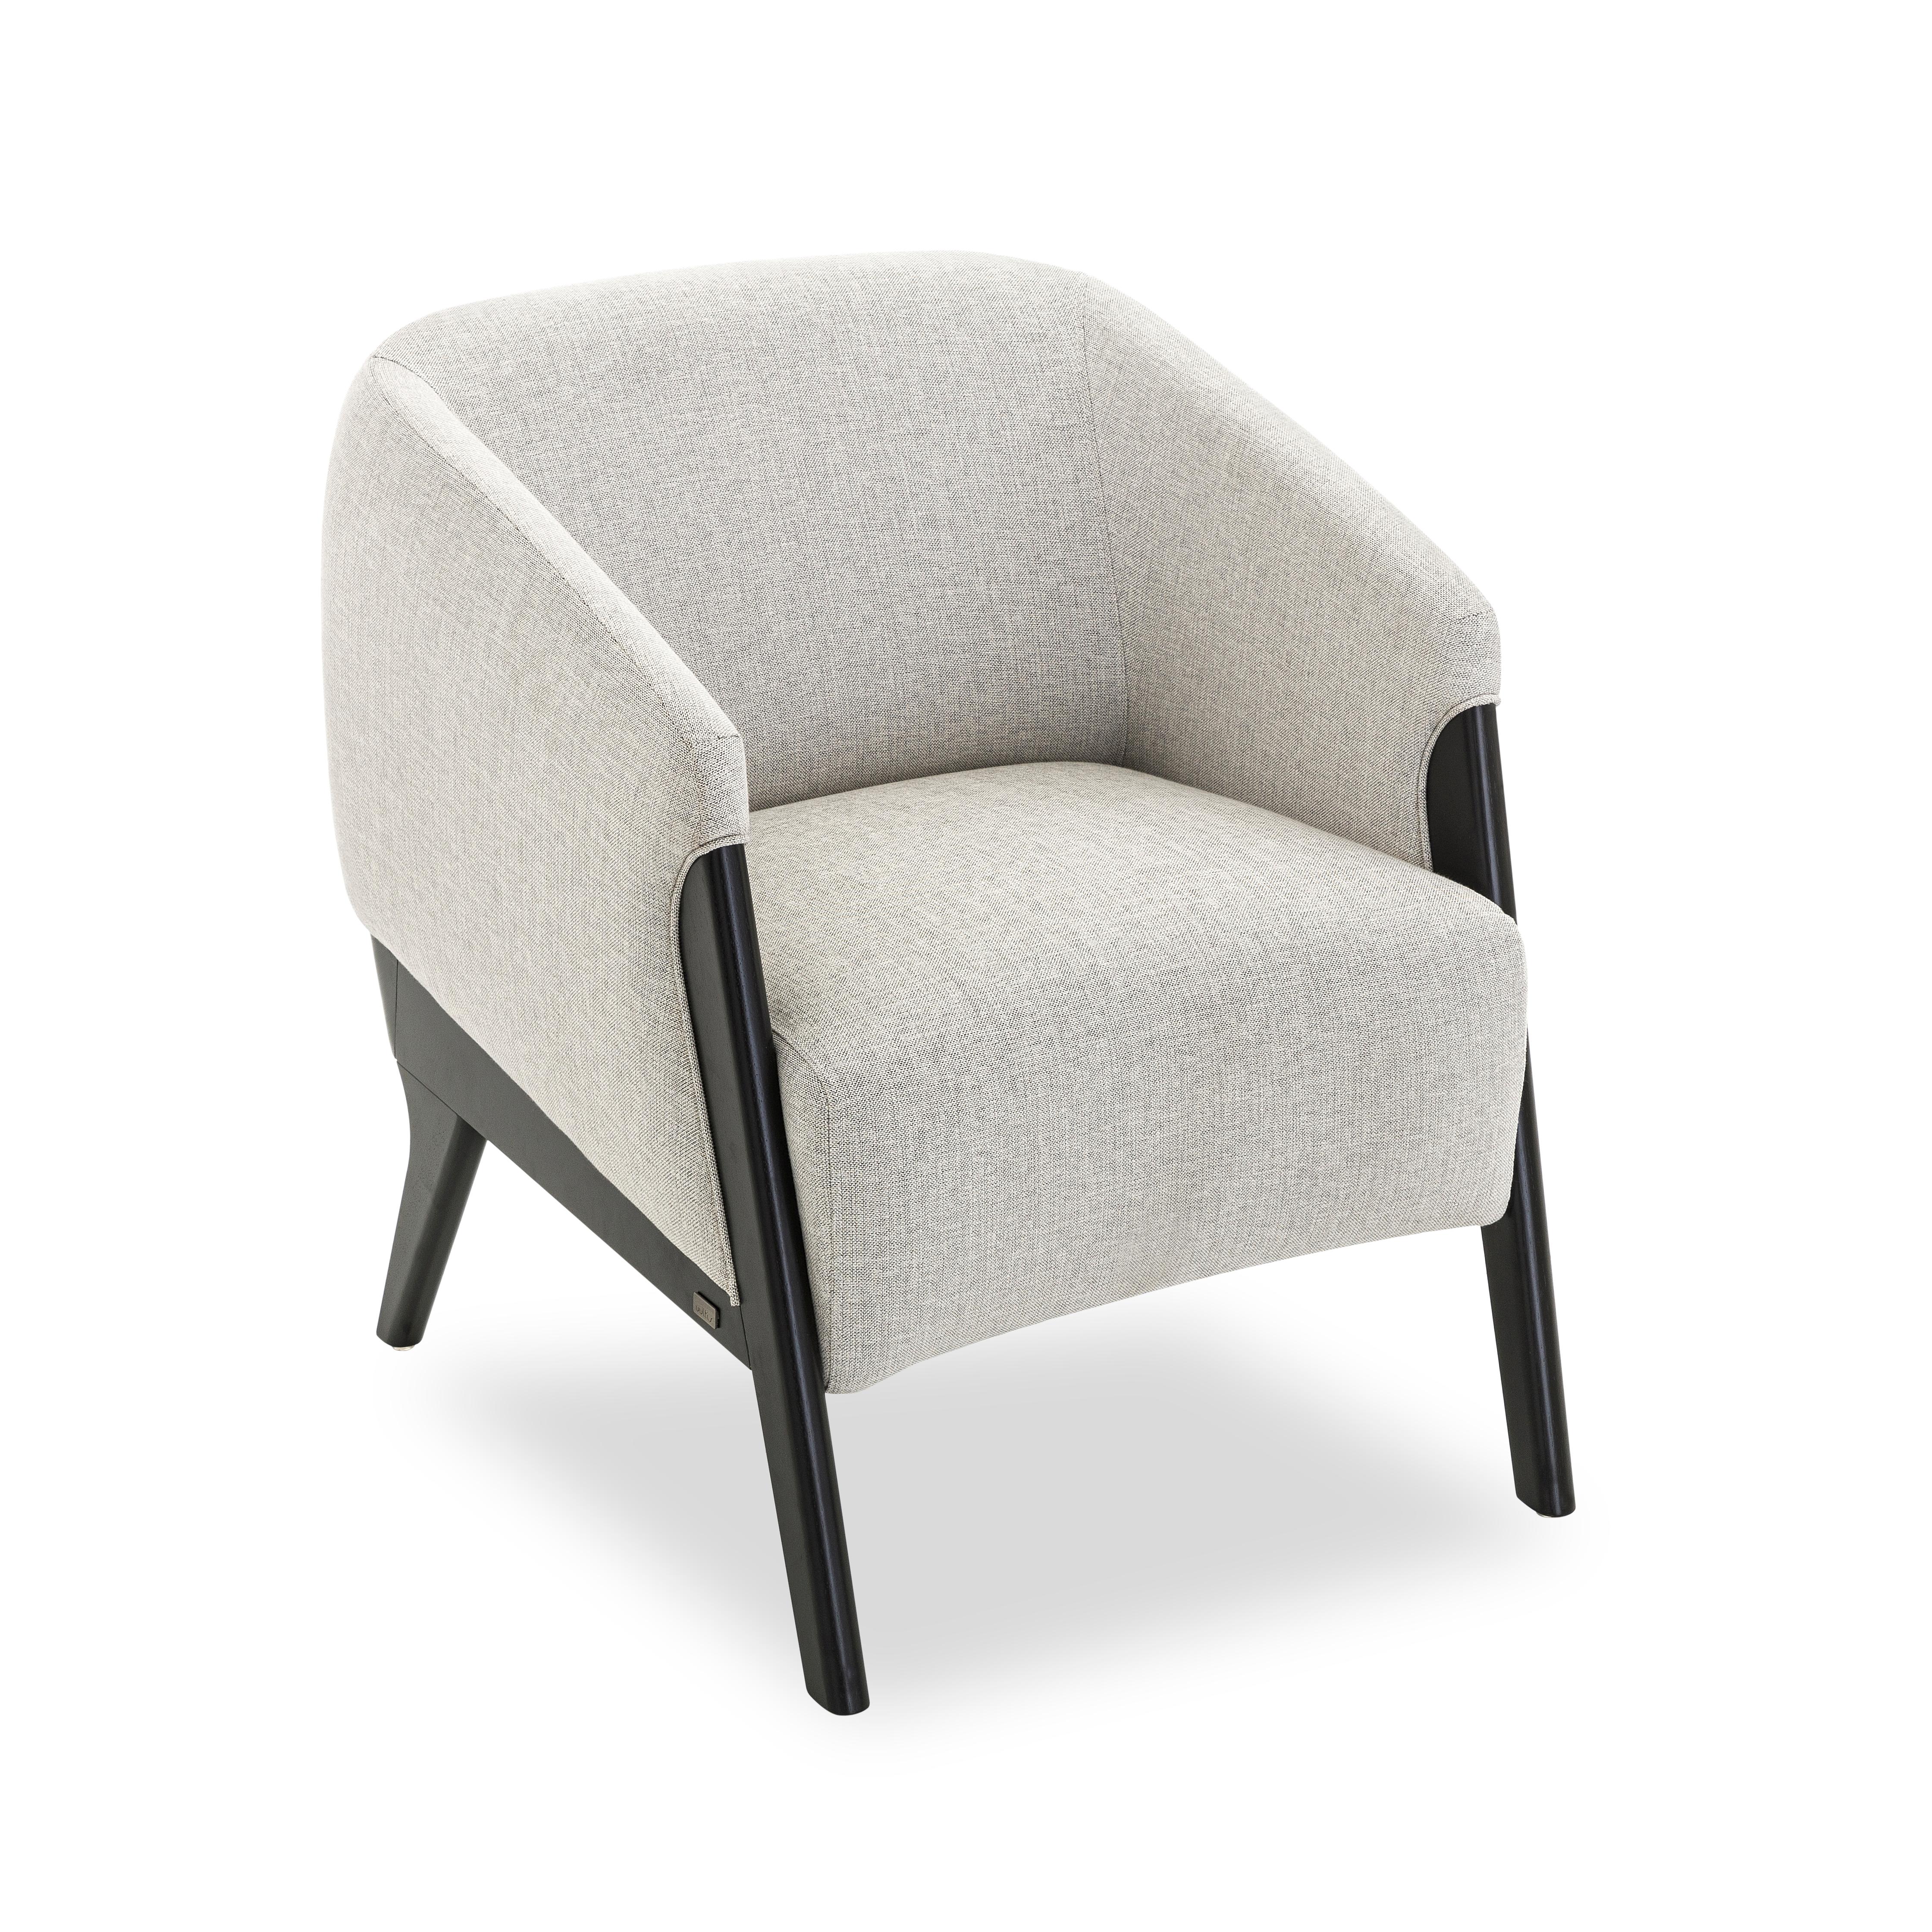 Abra Armchair in Black and White Upholstery and Black Wood Finish Frame In New Condition For Sale In Miami, FL